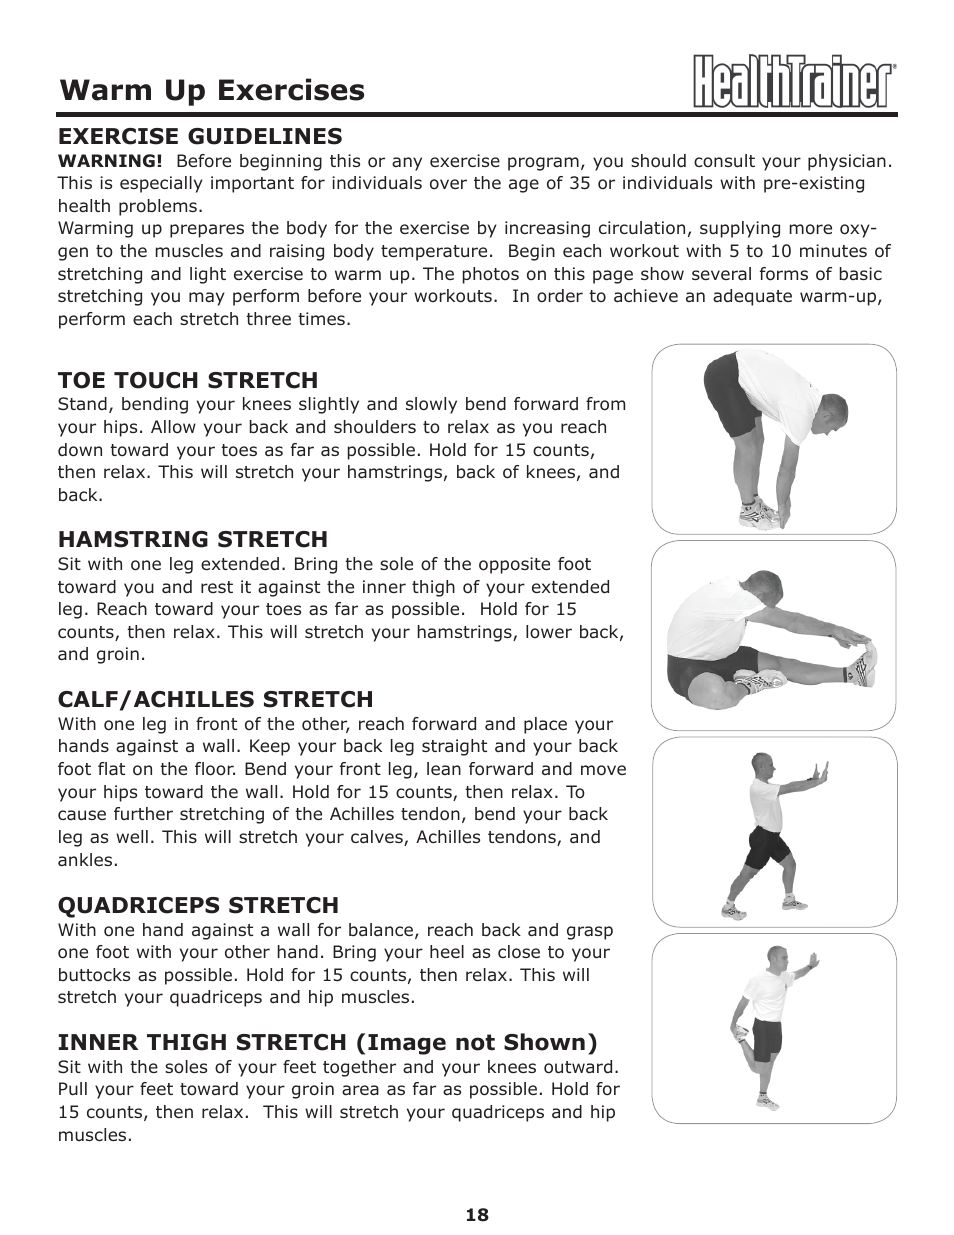 Warm up exercises | Keys Fitness Health Trainer CLASSIC HT-CLASSIC User  Manual | Page 18 / 29